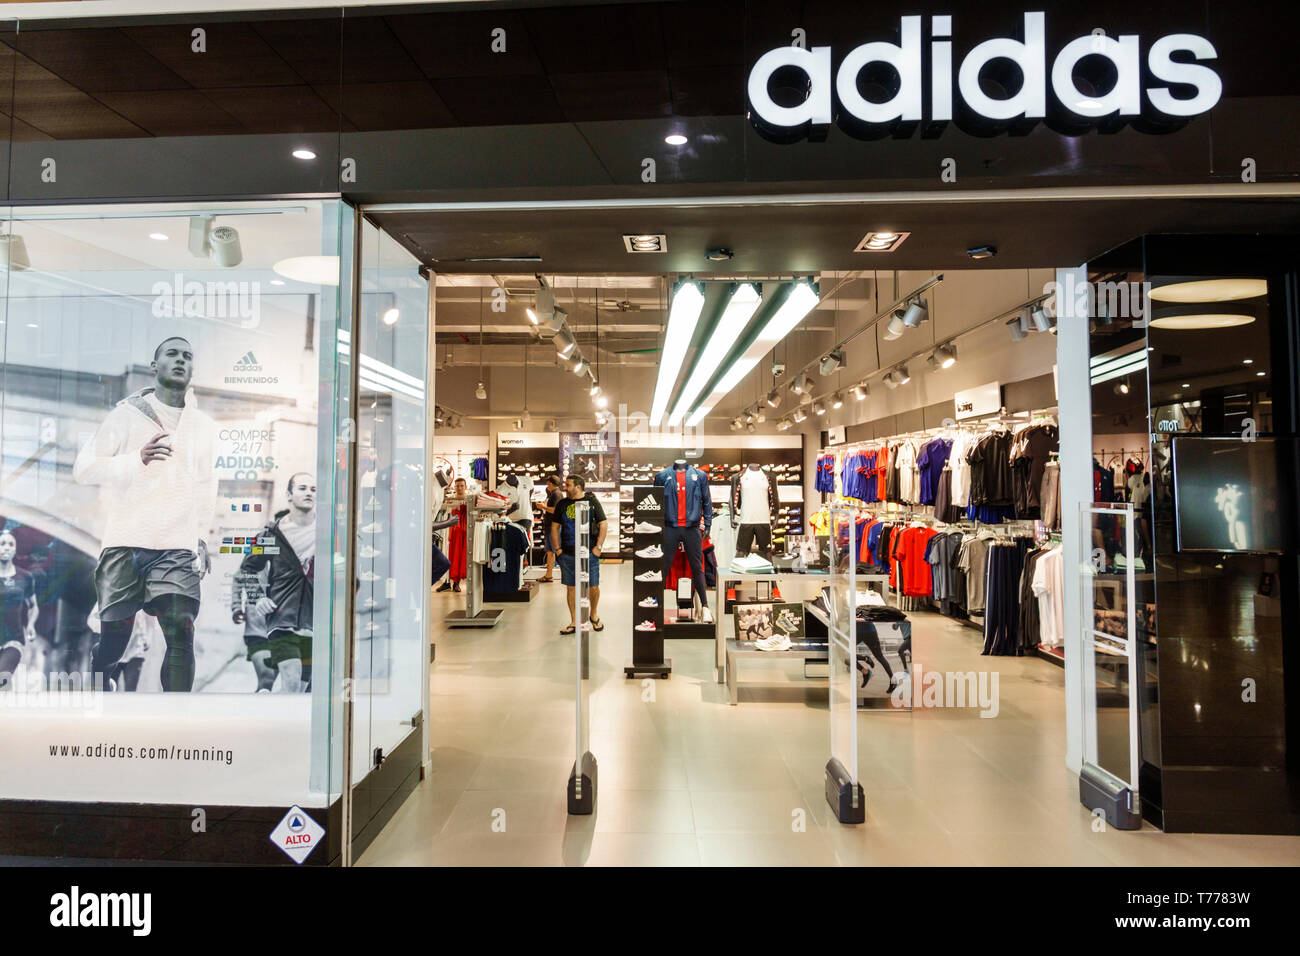 adidas brand store Online Shopping for Women, Men, Kids Fashion &  Lifestyle|Free Delivery & Returns! -